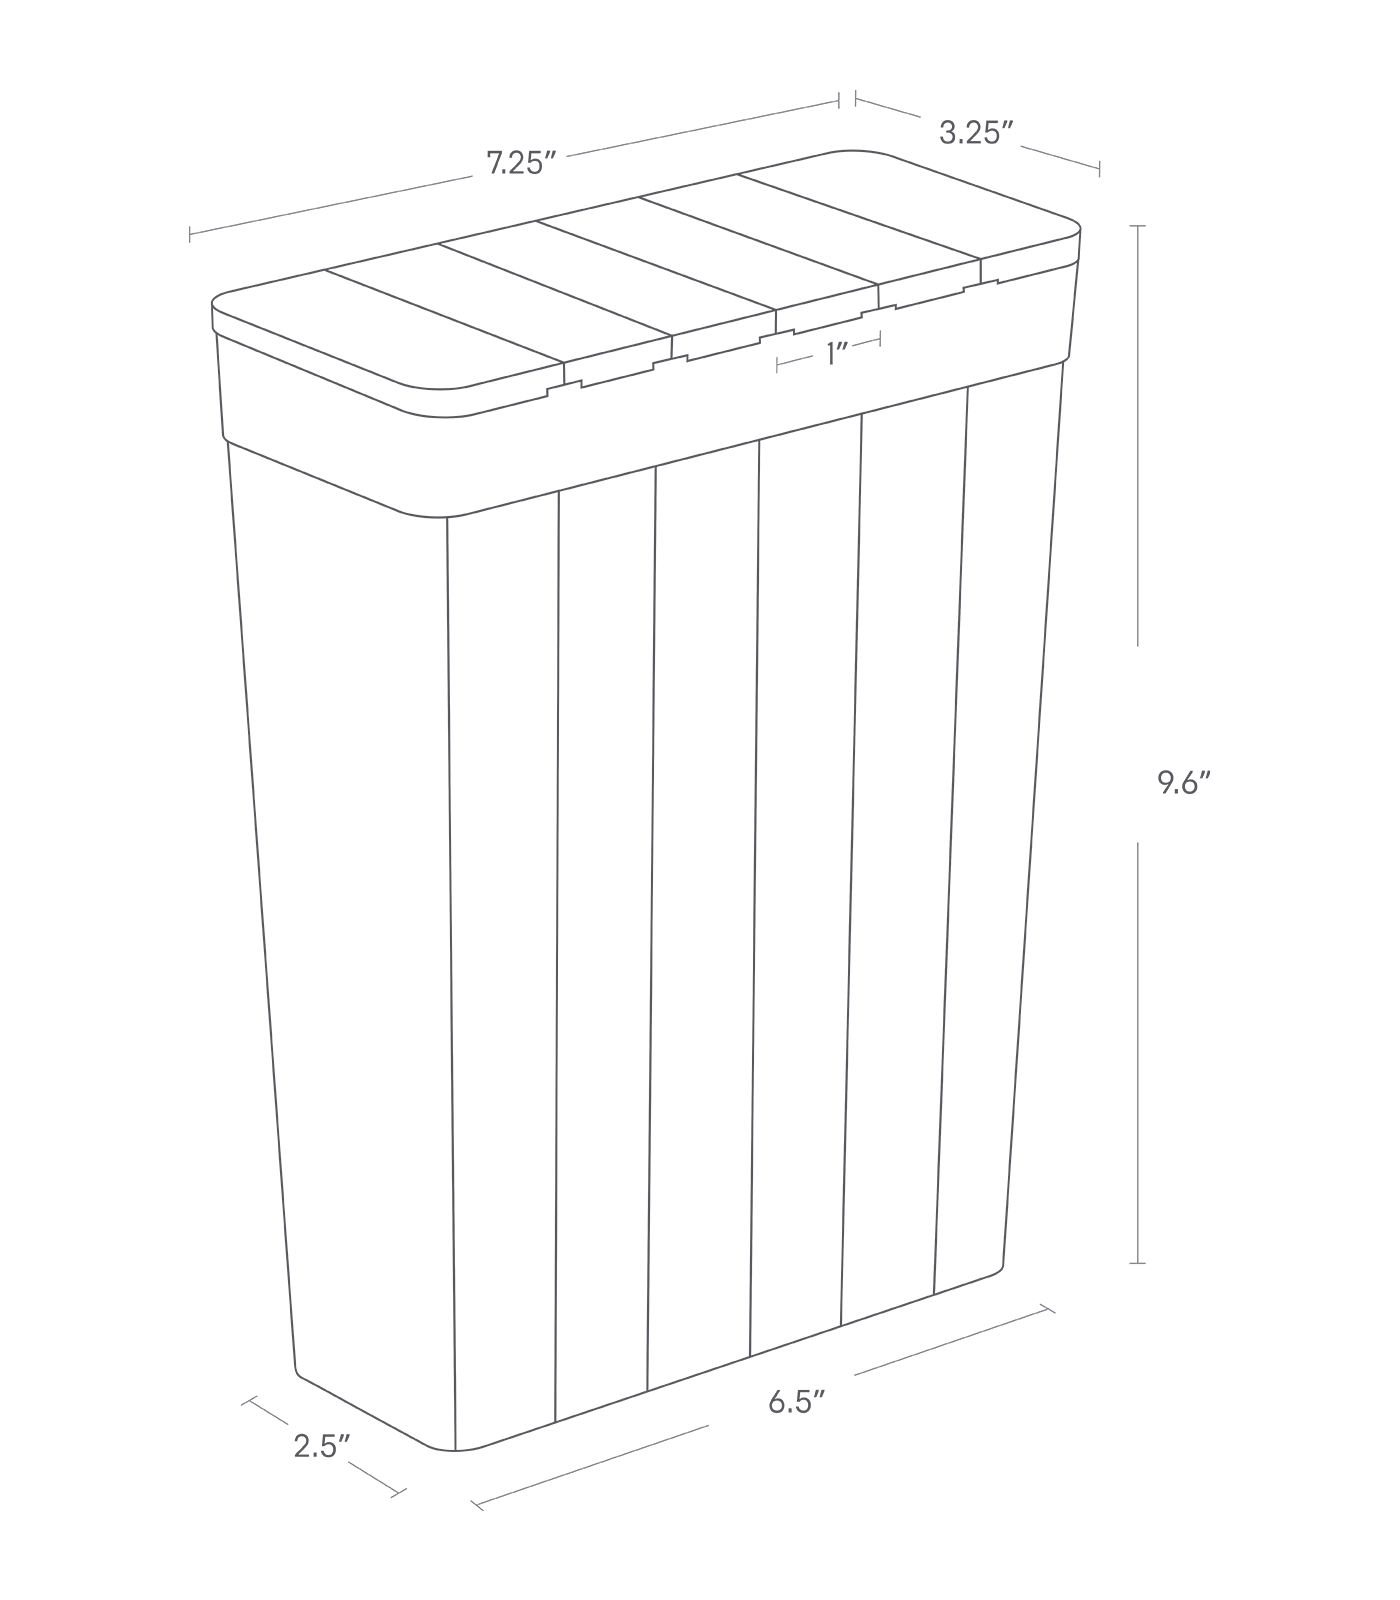 Dimension image for Measuring Storage Container on a white background including dimensions  L 3.35 x W 7.28 x H 9.65 inches